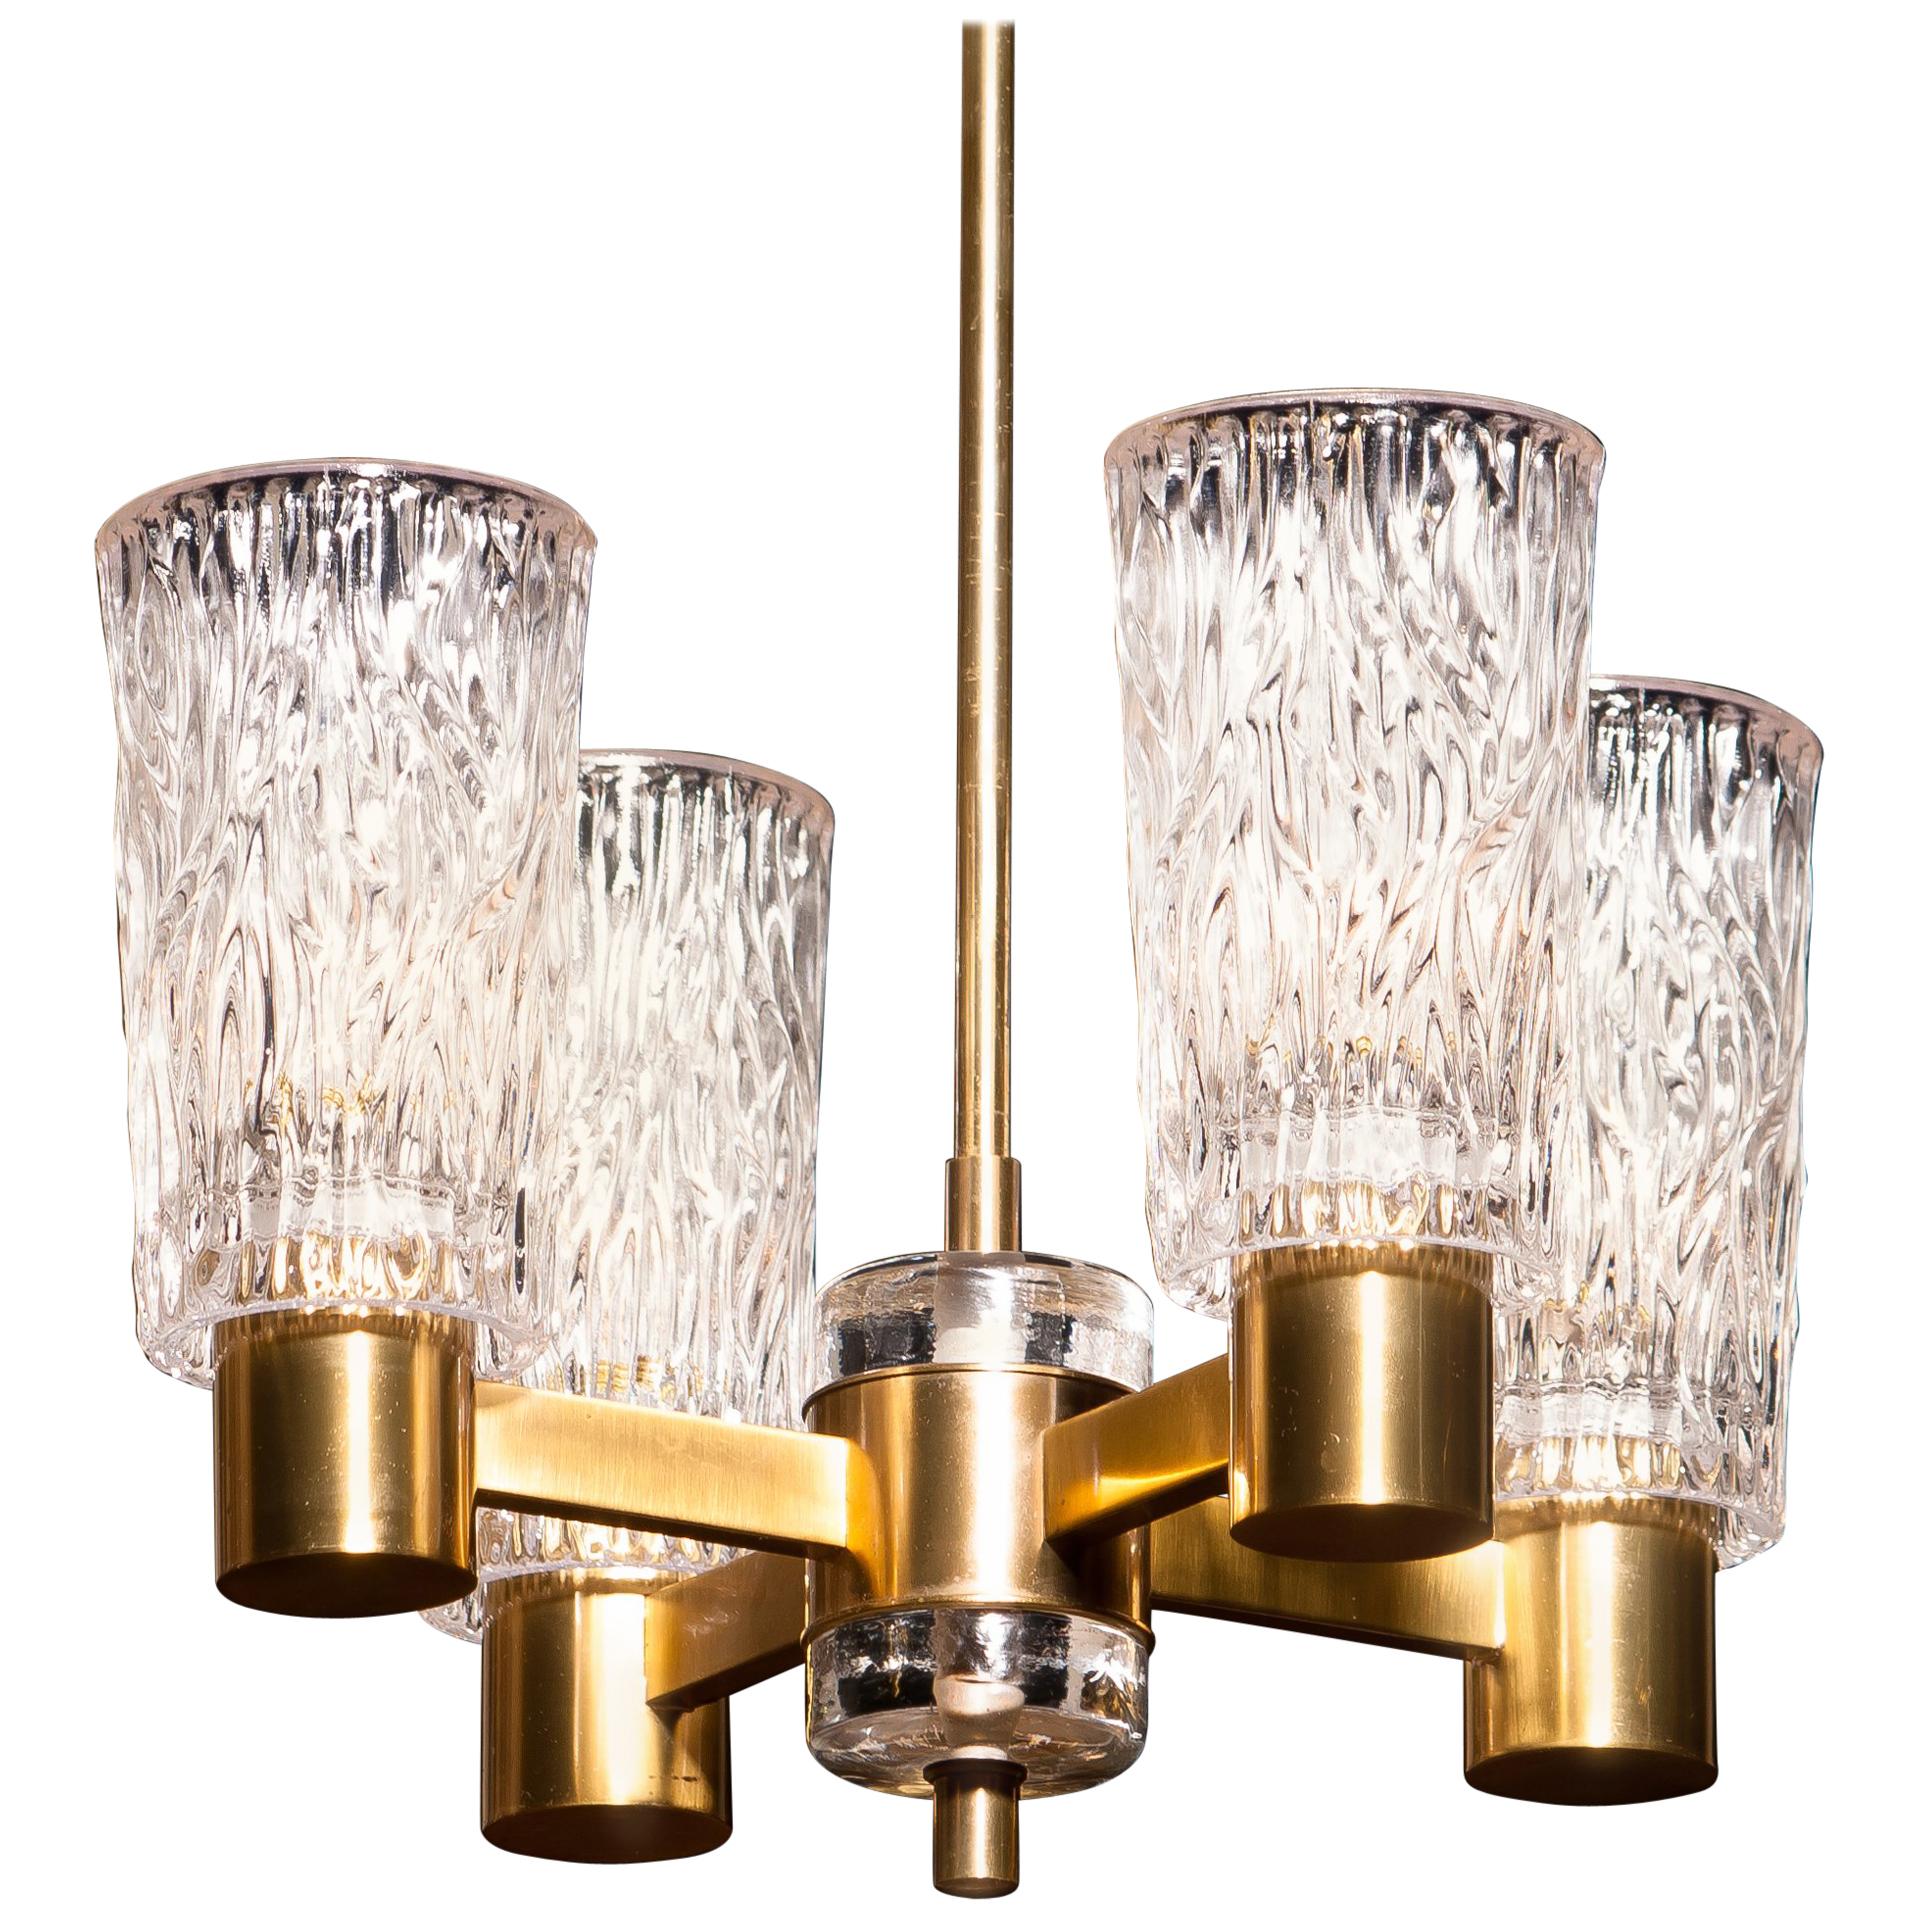 1950s, Brass and Crystal Glass Chandelier by Orrefors